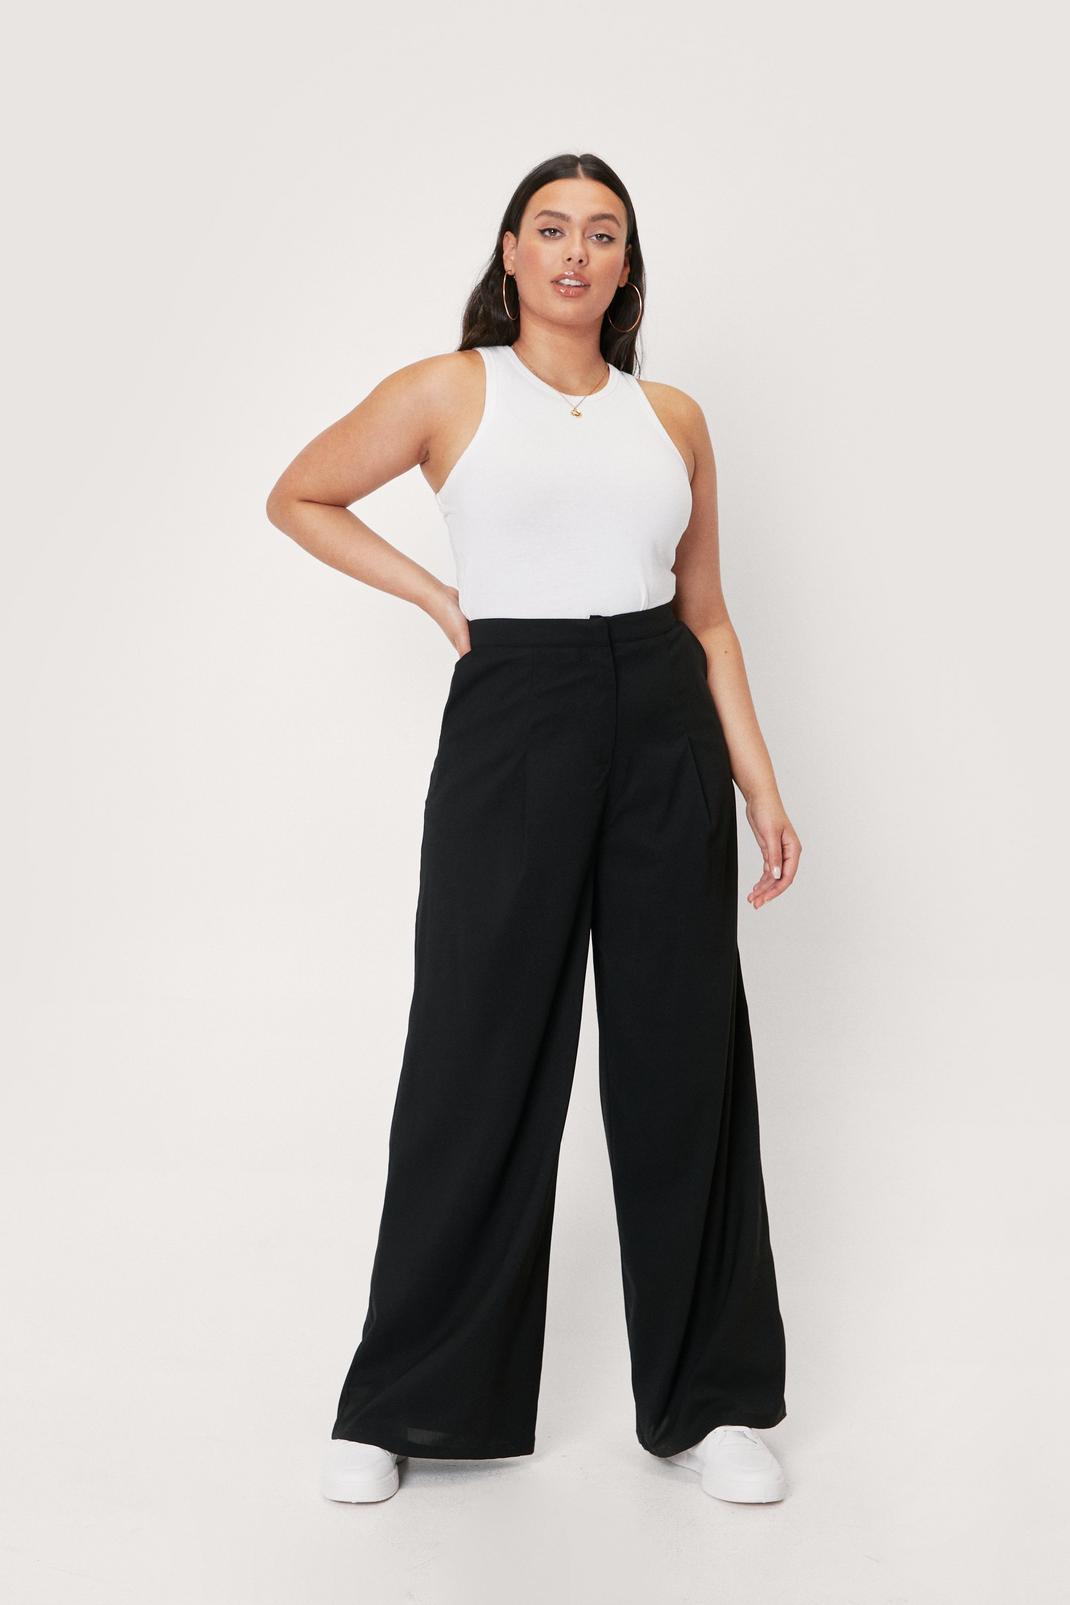 WHLBF Women's Plus Size Clearance Pants Solid Color Straight Wide Leg  Trousers with Pocket Black 14(XXXL) 